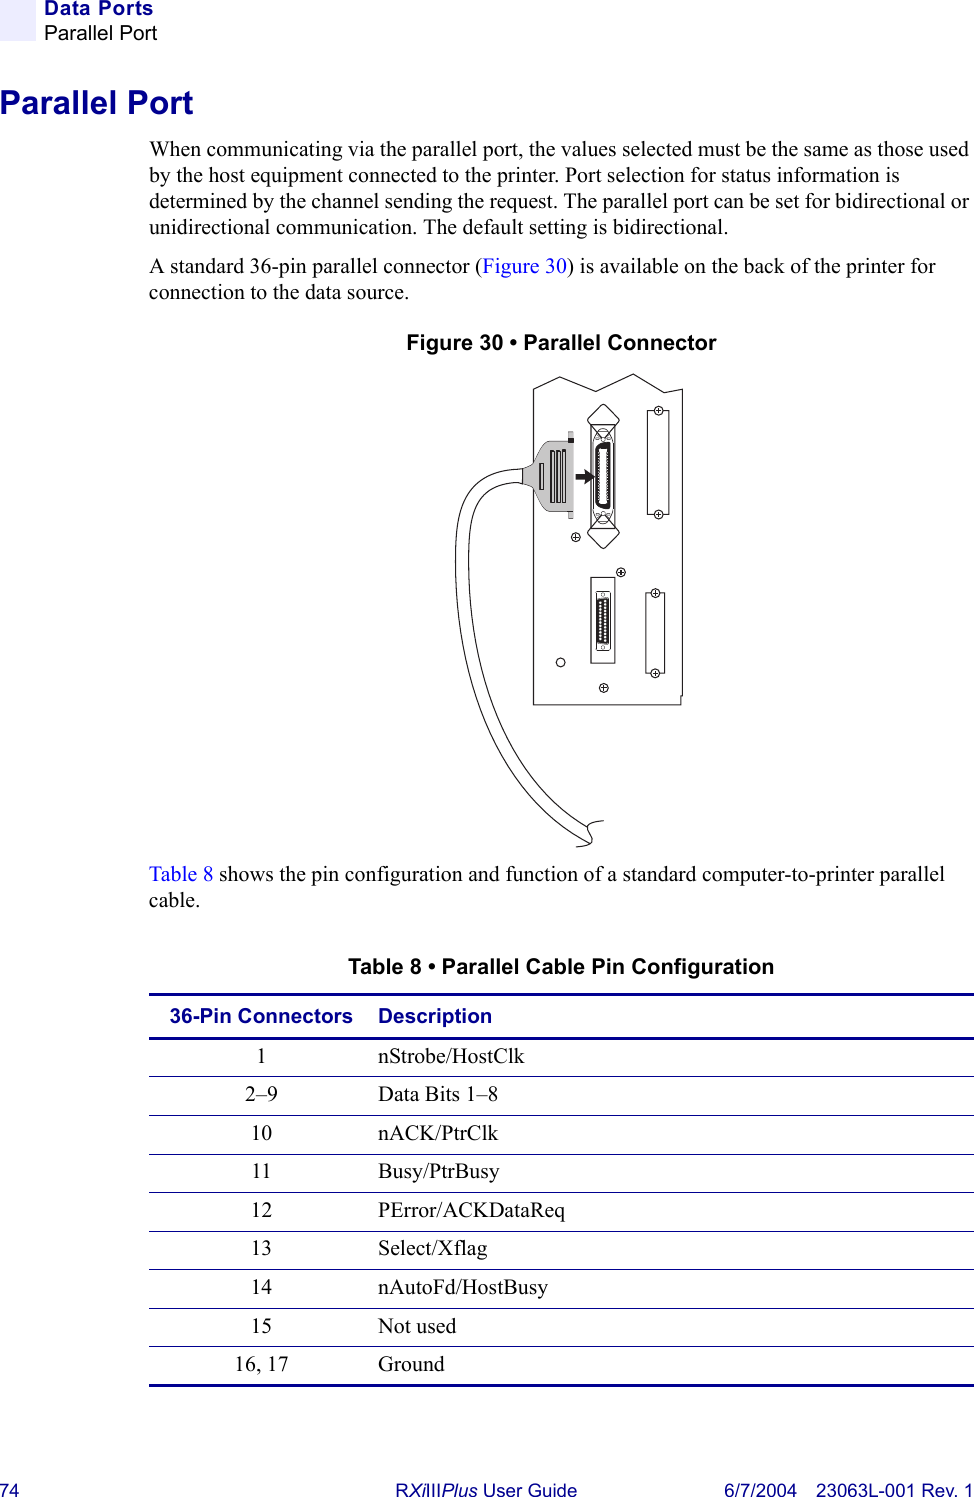 74 RXiIIIPlus User Guide 6/7/2004 23063L-001 Rev. 1Data PortsParallel PortParallel PortWhen communicating via the parallel port, the values selected must be the same as those used by the host equipment connected to the printer. Port selection for status information is determined by the channel sending the request. The parallel port can be set for bidirectional or unidirectional communication. The default setting is bidirectional.A standard 36-pin parallel connector (Figure 30) is available on the back of the printer for connection to the data source.Figure 30 • Parallel ConnectorTable 8 shows the pin configuration and function of a standard computer-to-printer parallel cable.Table 8 • Parallel Cable Pin Configuration36-Pin Connectors Description1 nStrobe/HostClk2–9 Data Bits 1–810 nACK/PtrClk11 Busy/PtrBusy12 PError/ACKDataReq13 Select/Xflag14 nAutoFd/HostBusy15 Not used16, 17 Ground